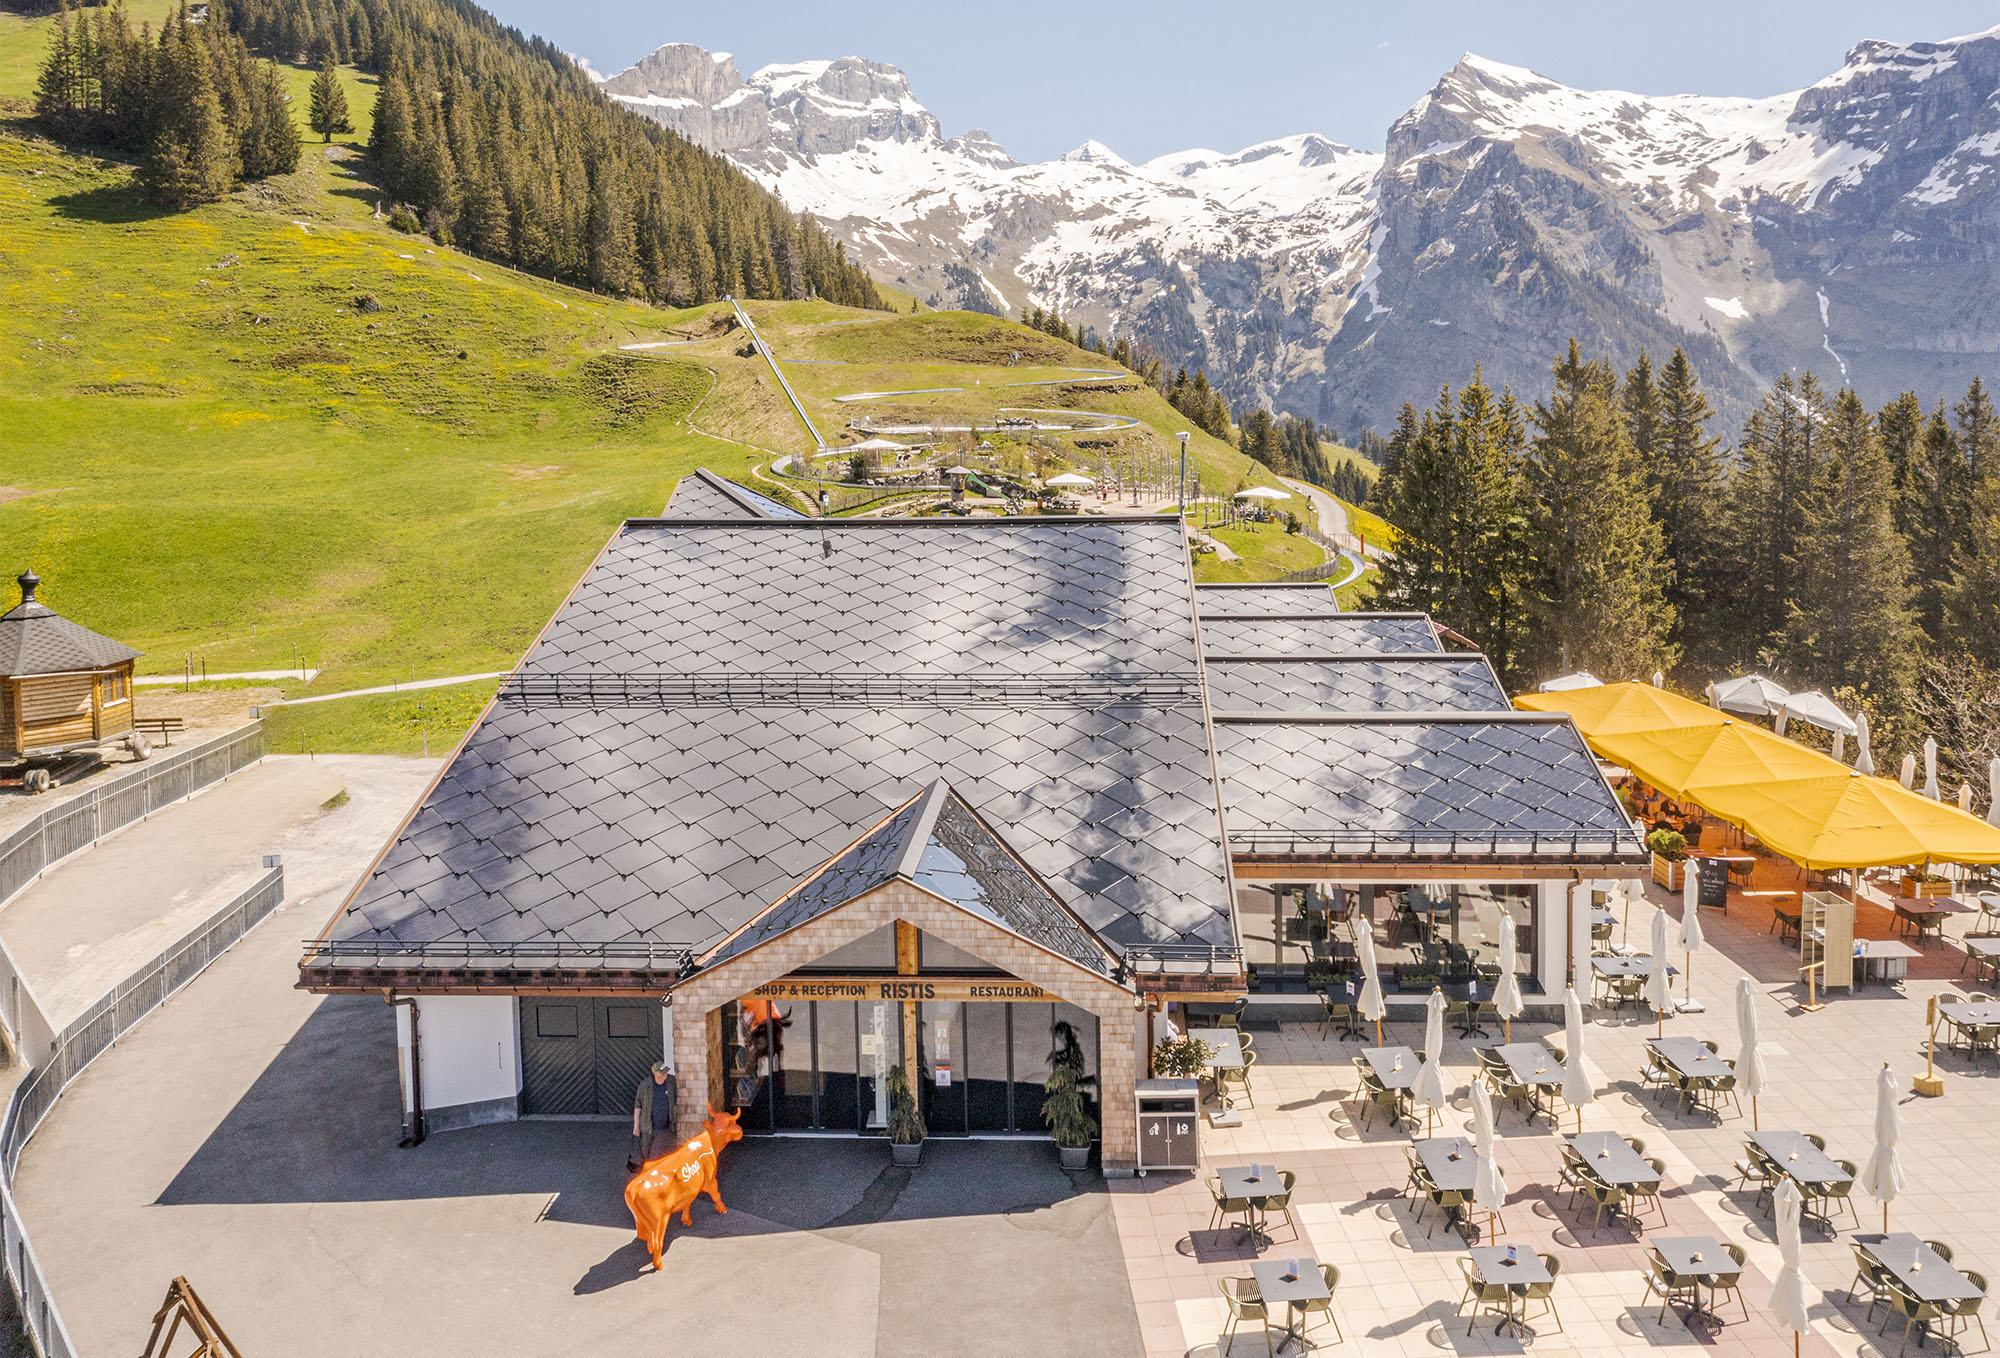 SunStyle by CertainTeed solar roofing on restaurant in the mountains